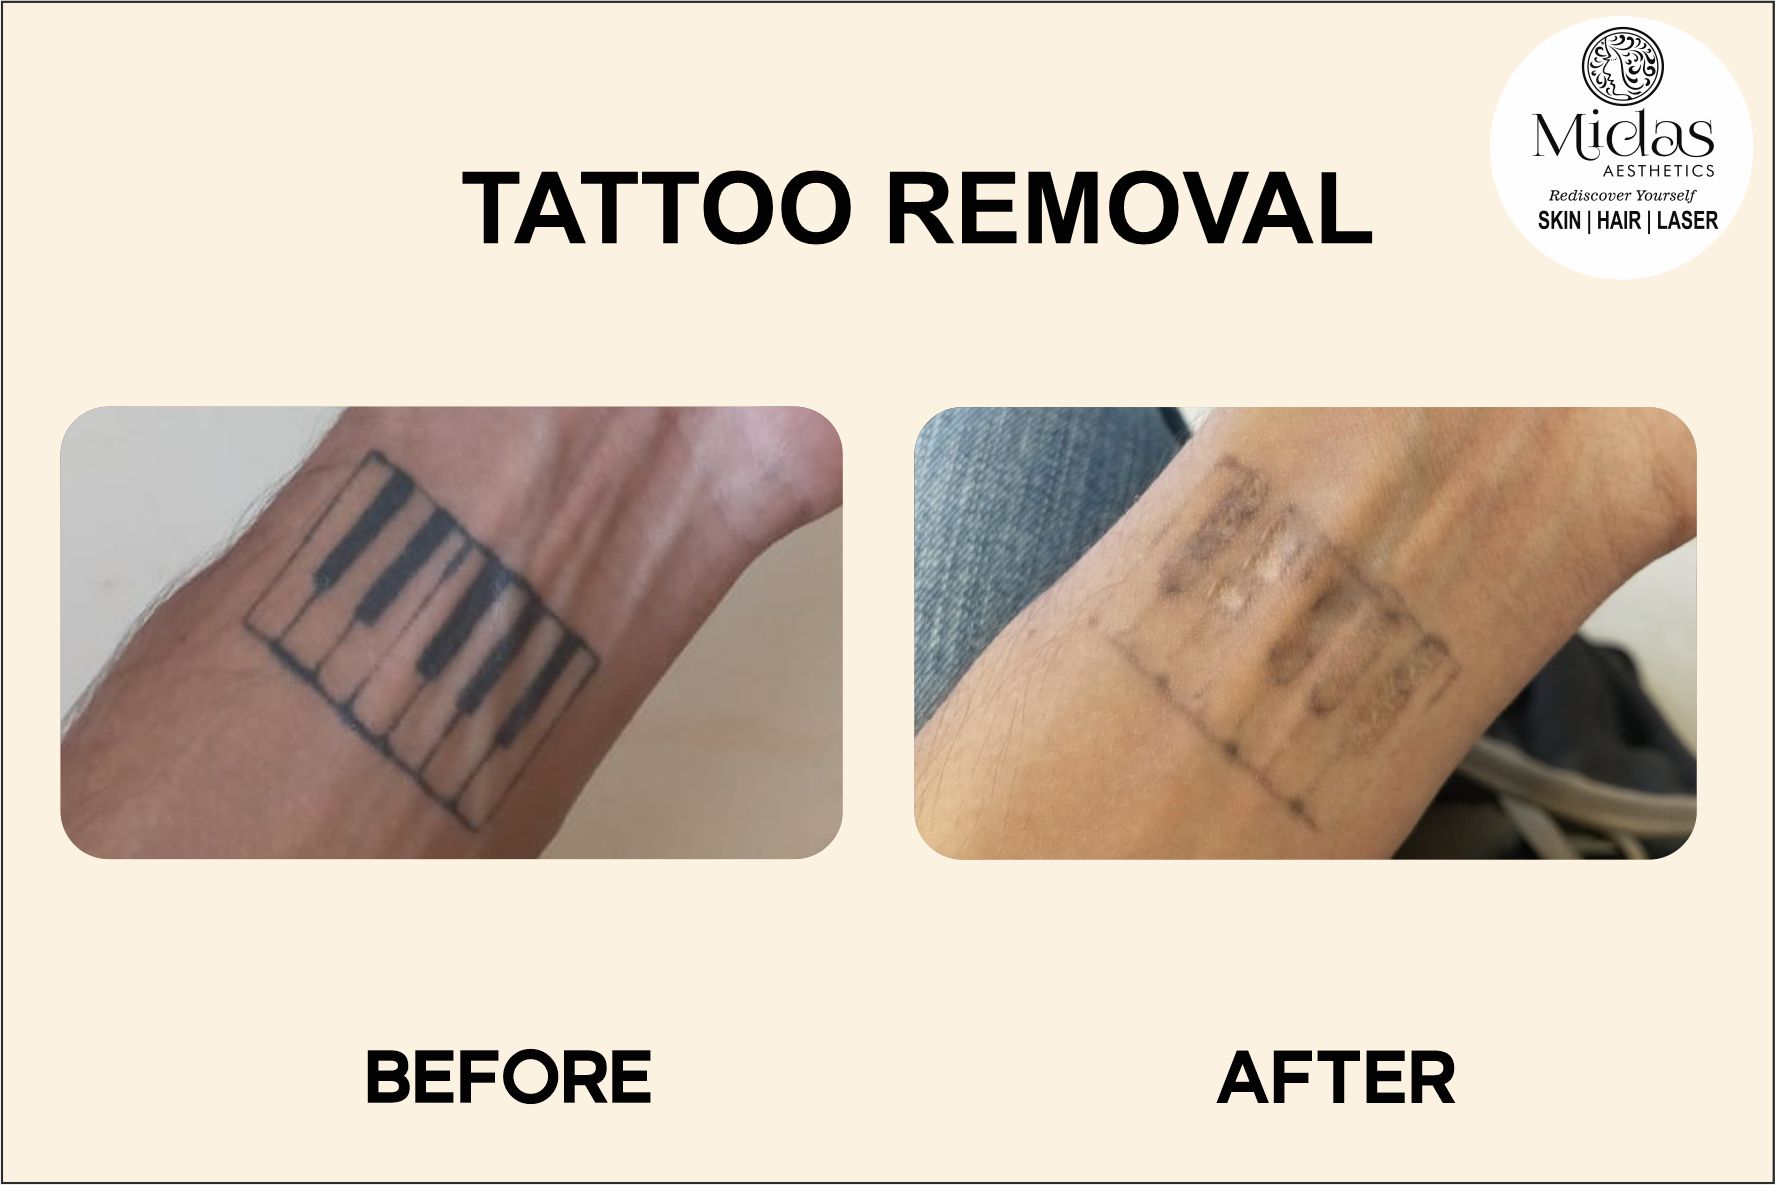 Tattoo Removal before and after images